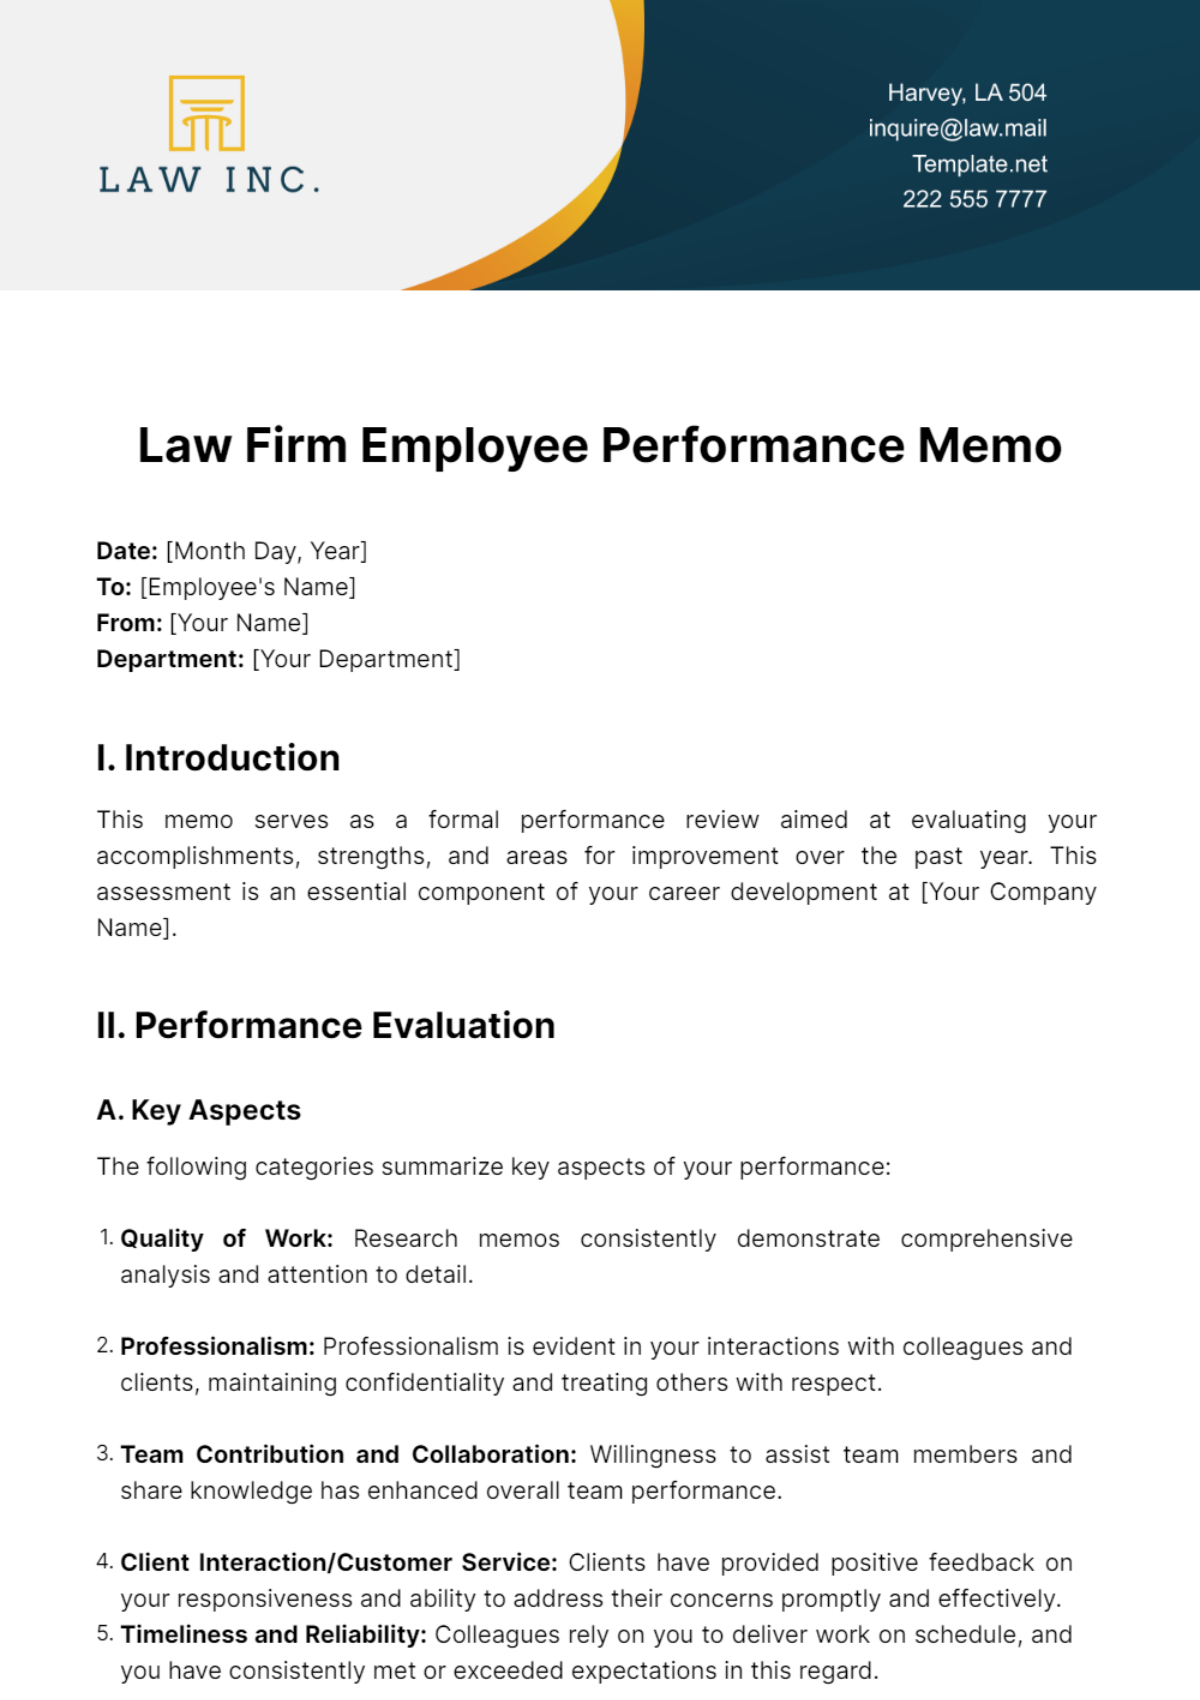 Free Law Firm Employee Performance Memo Template